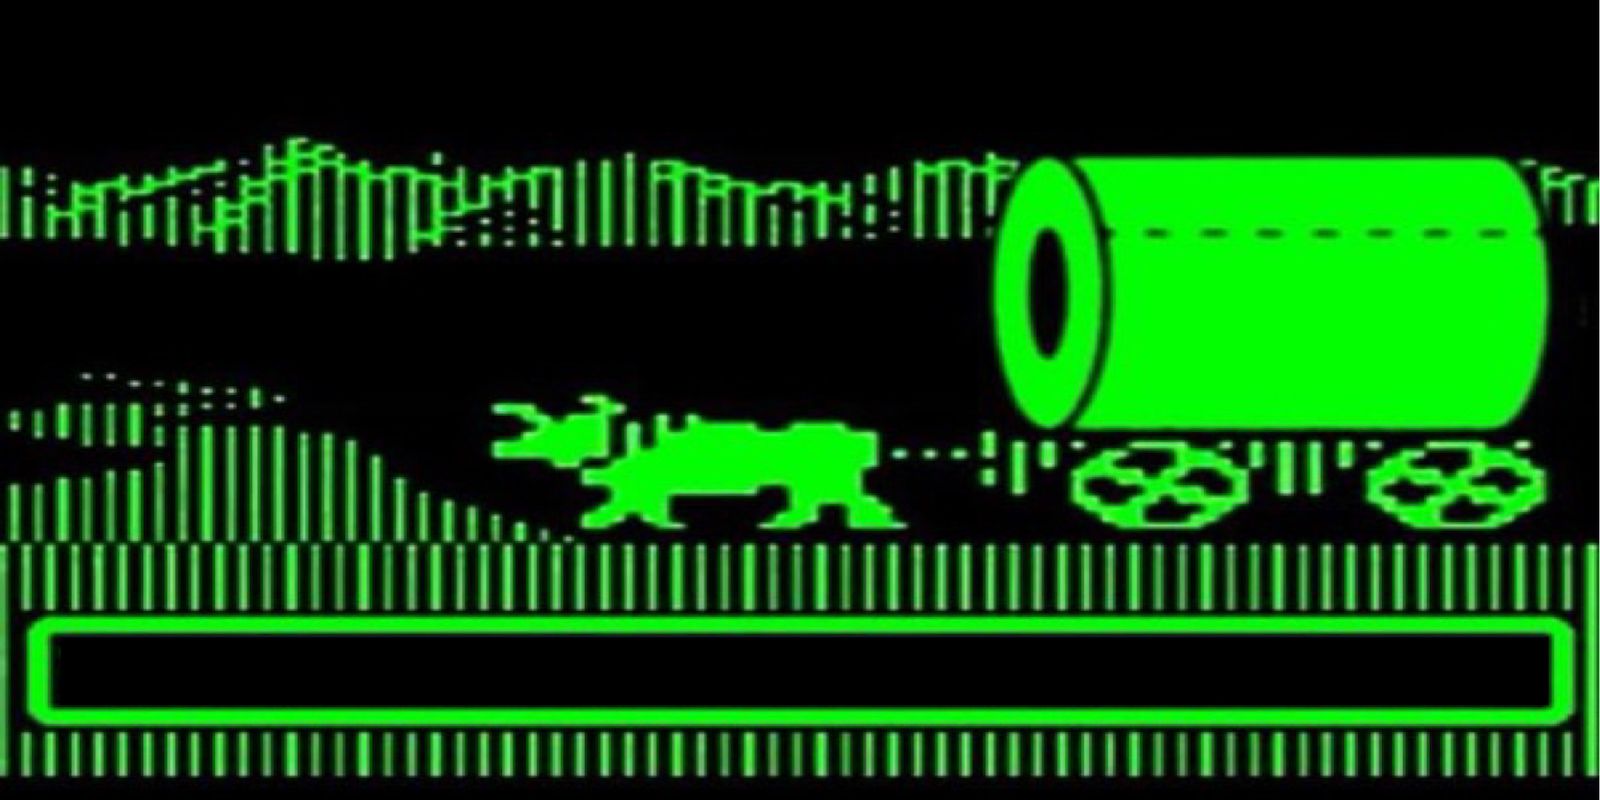 An image of The Oregon Trail's retro computer graphics, all in green on a black screen.